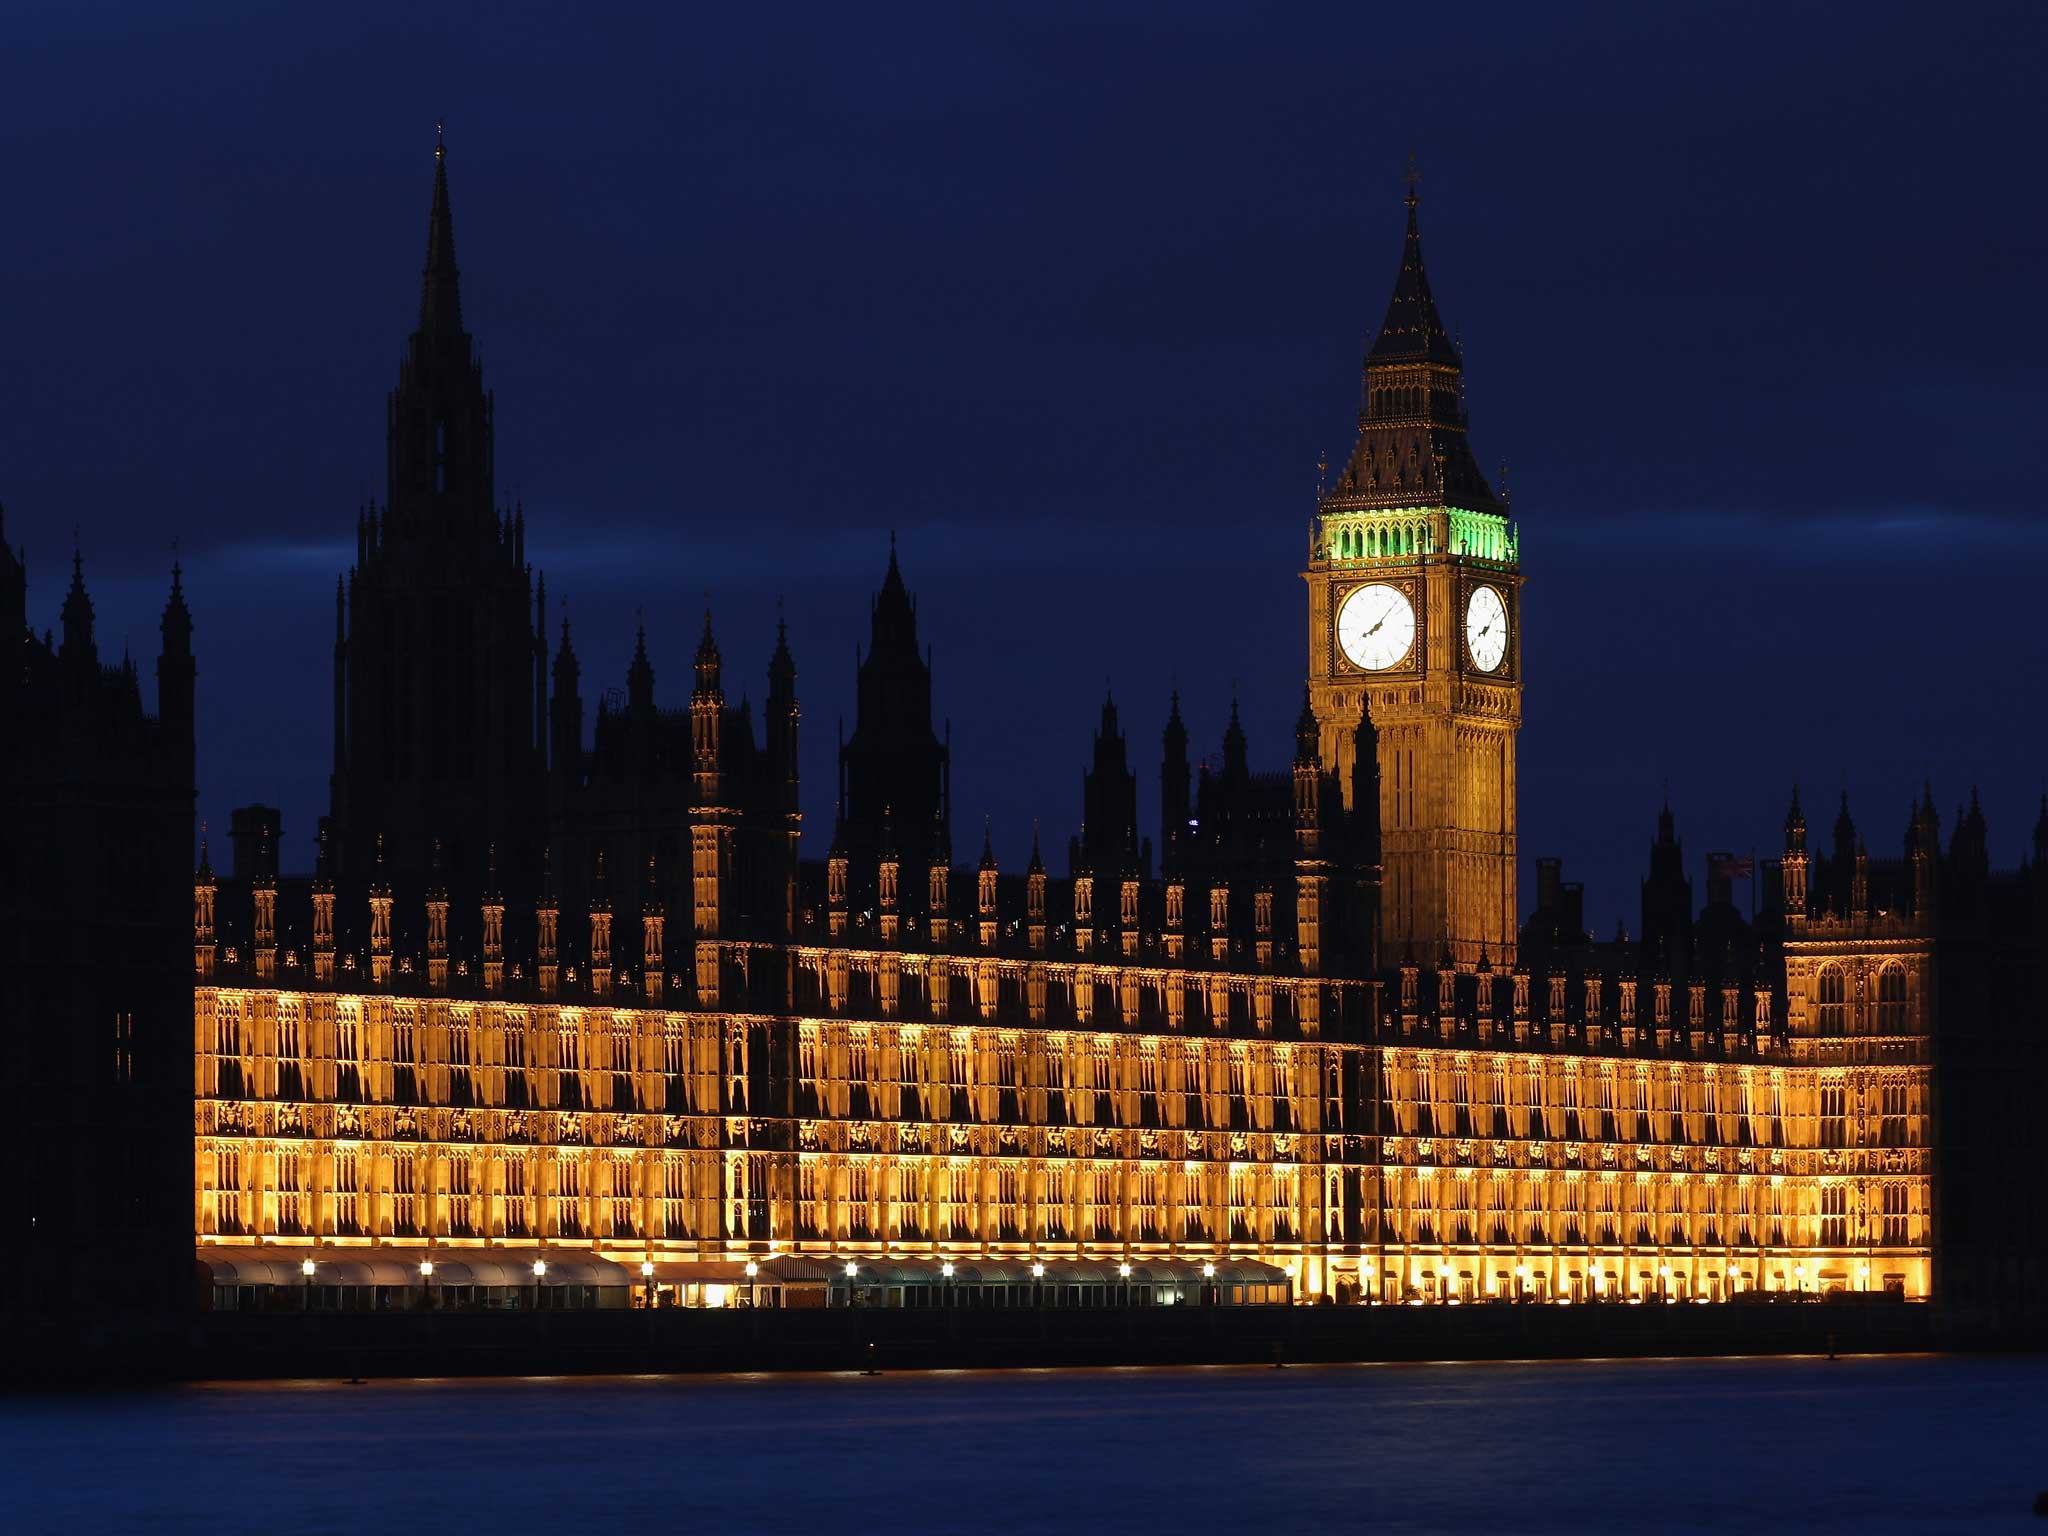 The Houses of Parliament illuminated at night